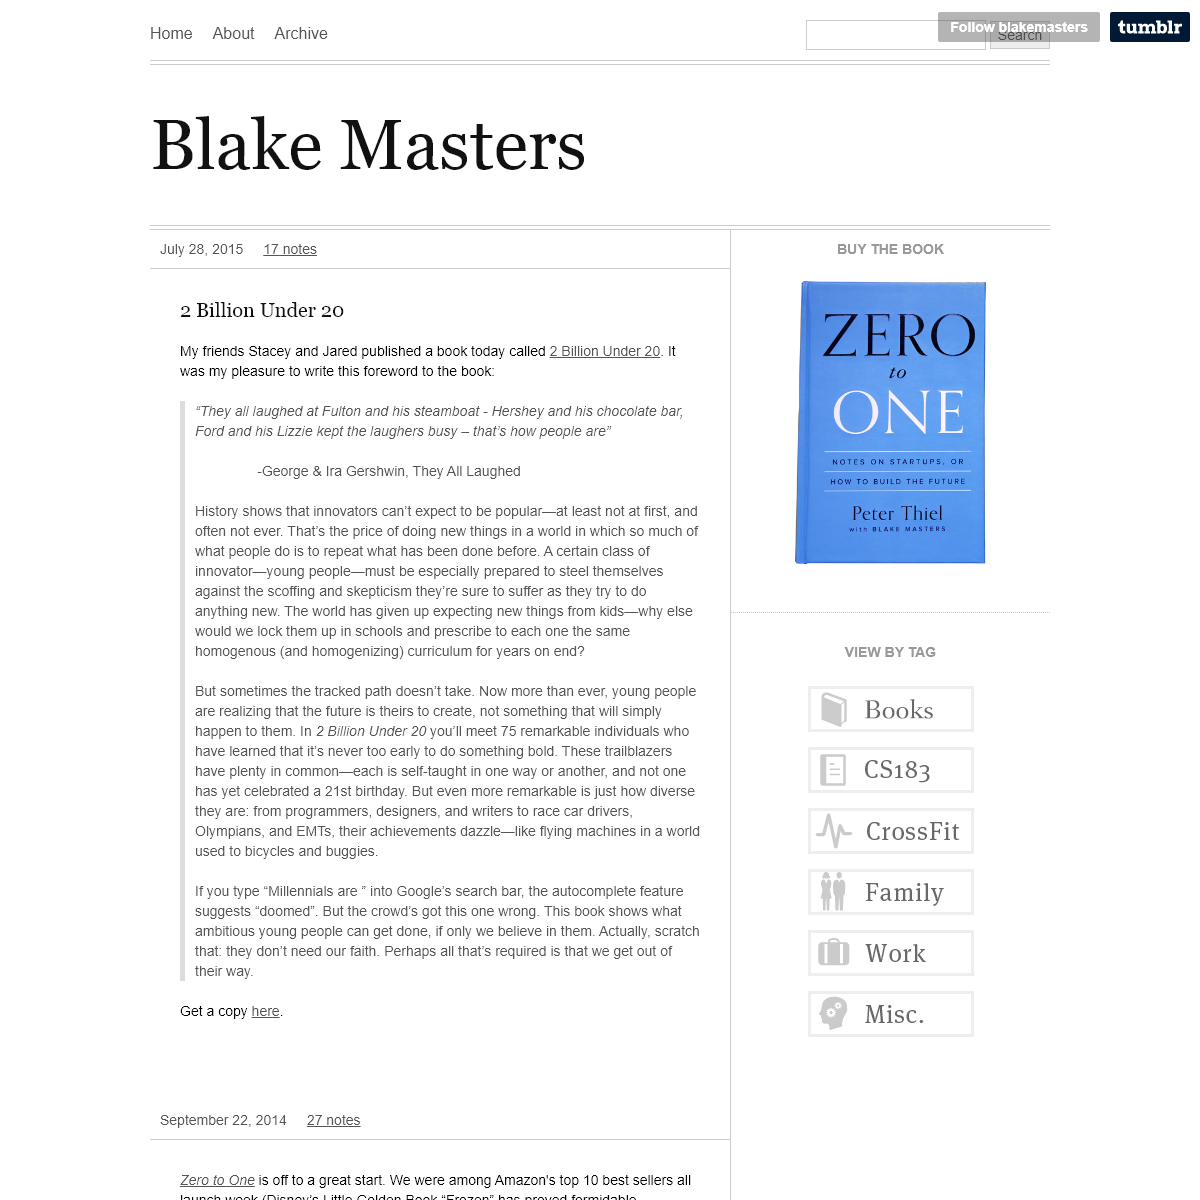 A complete backup of blakemasters.com